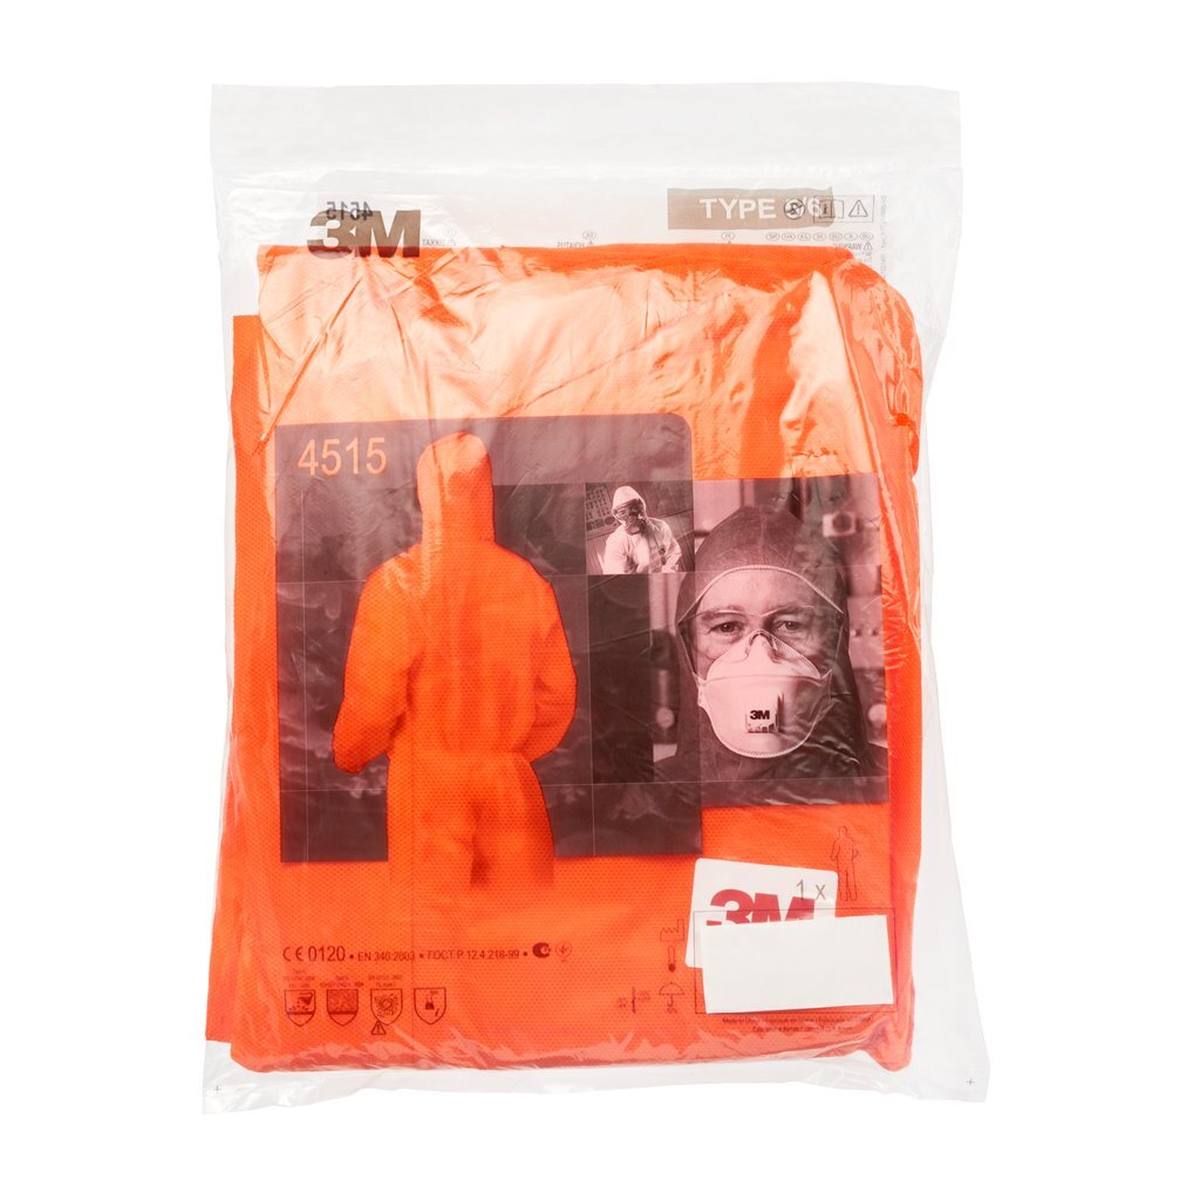 3M 4515O Protective coverall, orange, TYPE 5/6, size L, material SMMS low-lint, elastic band finish